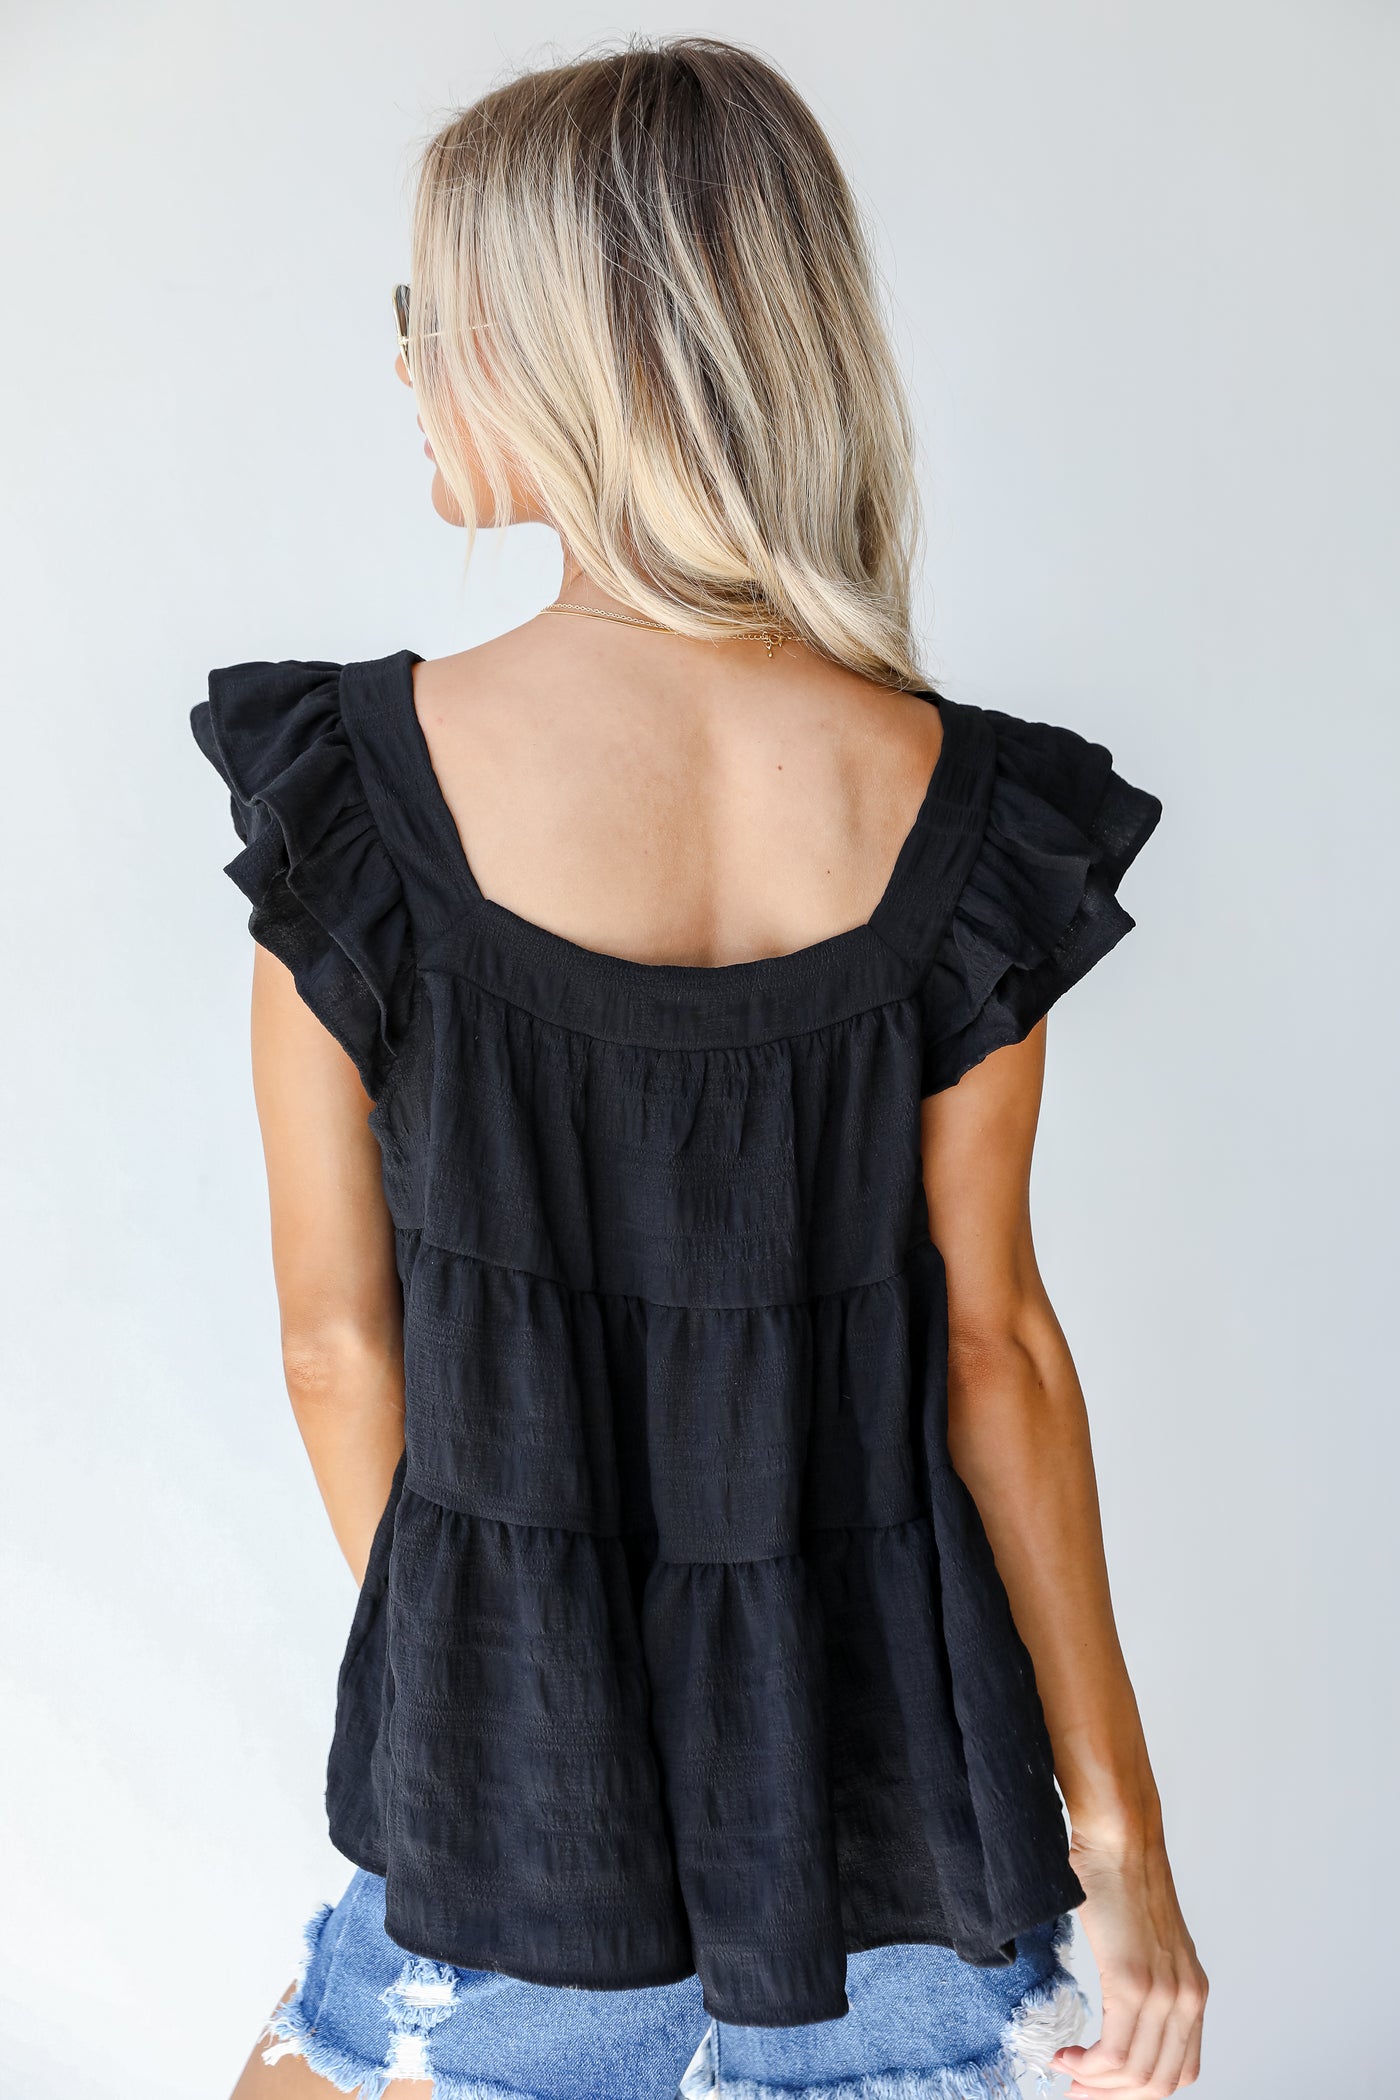 Tiered Tank in black back view